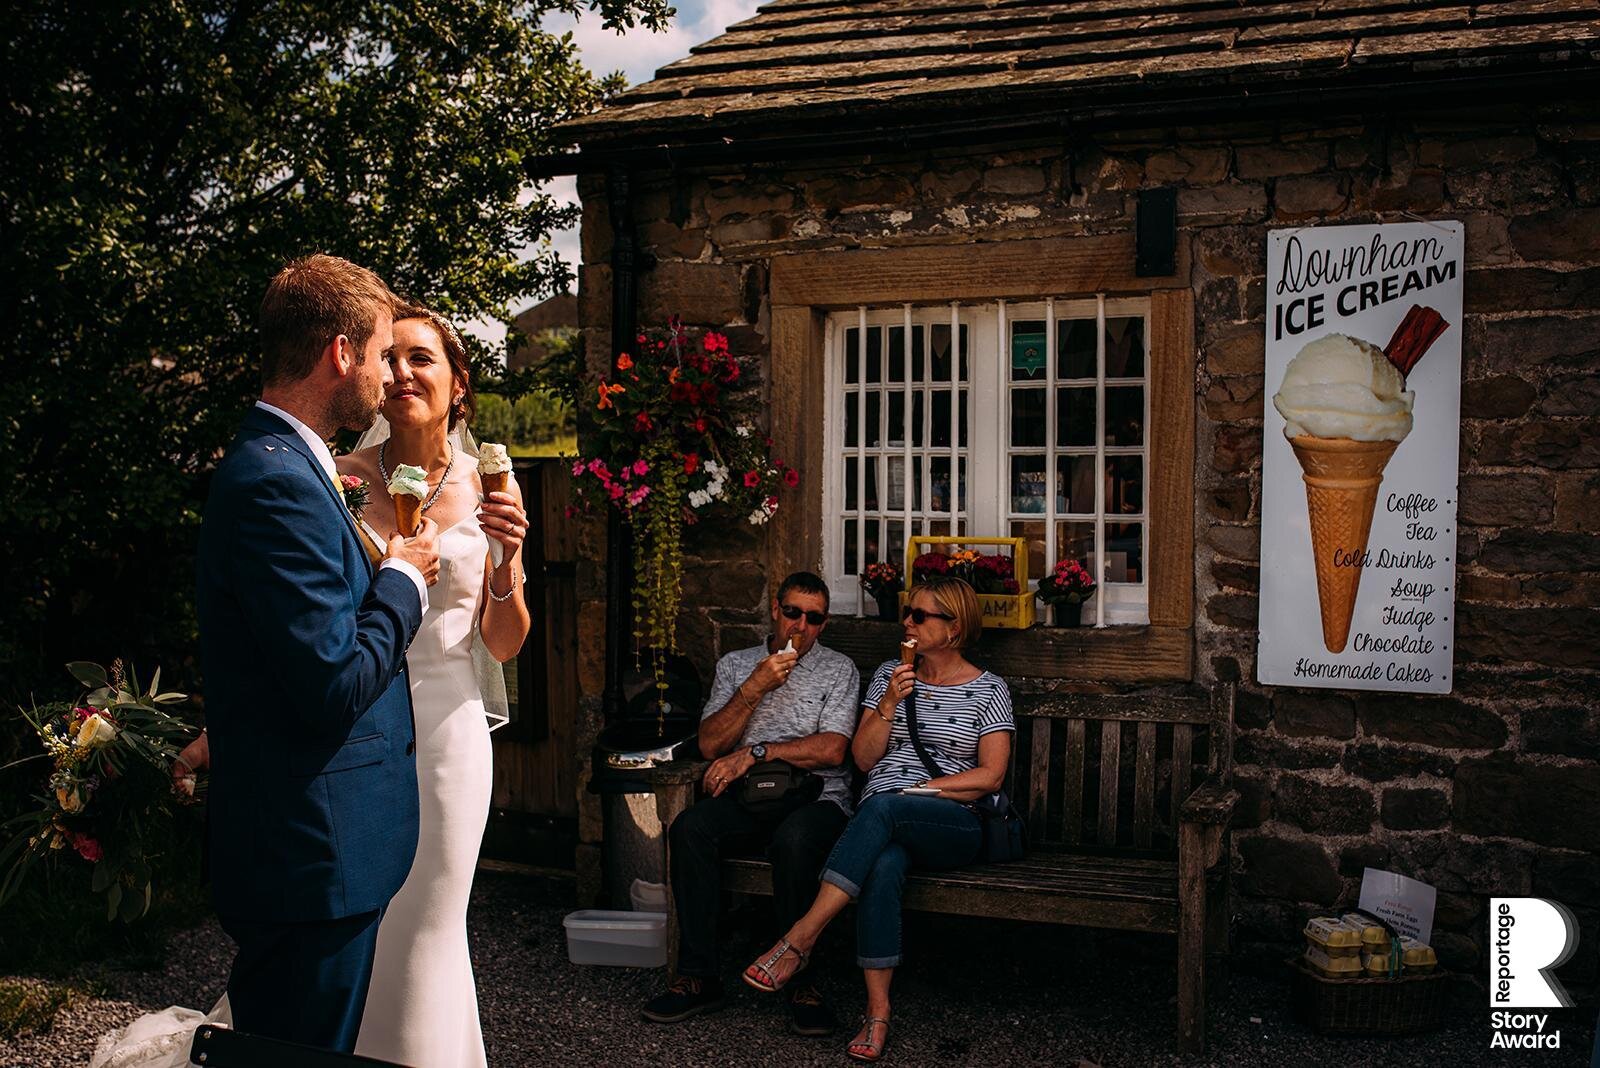  Bride and groom eating ice cream. 